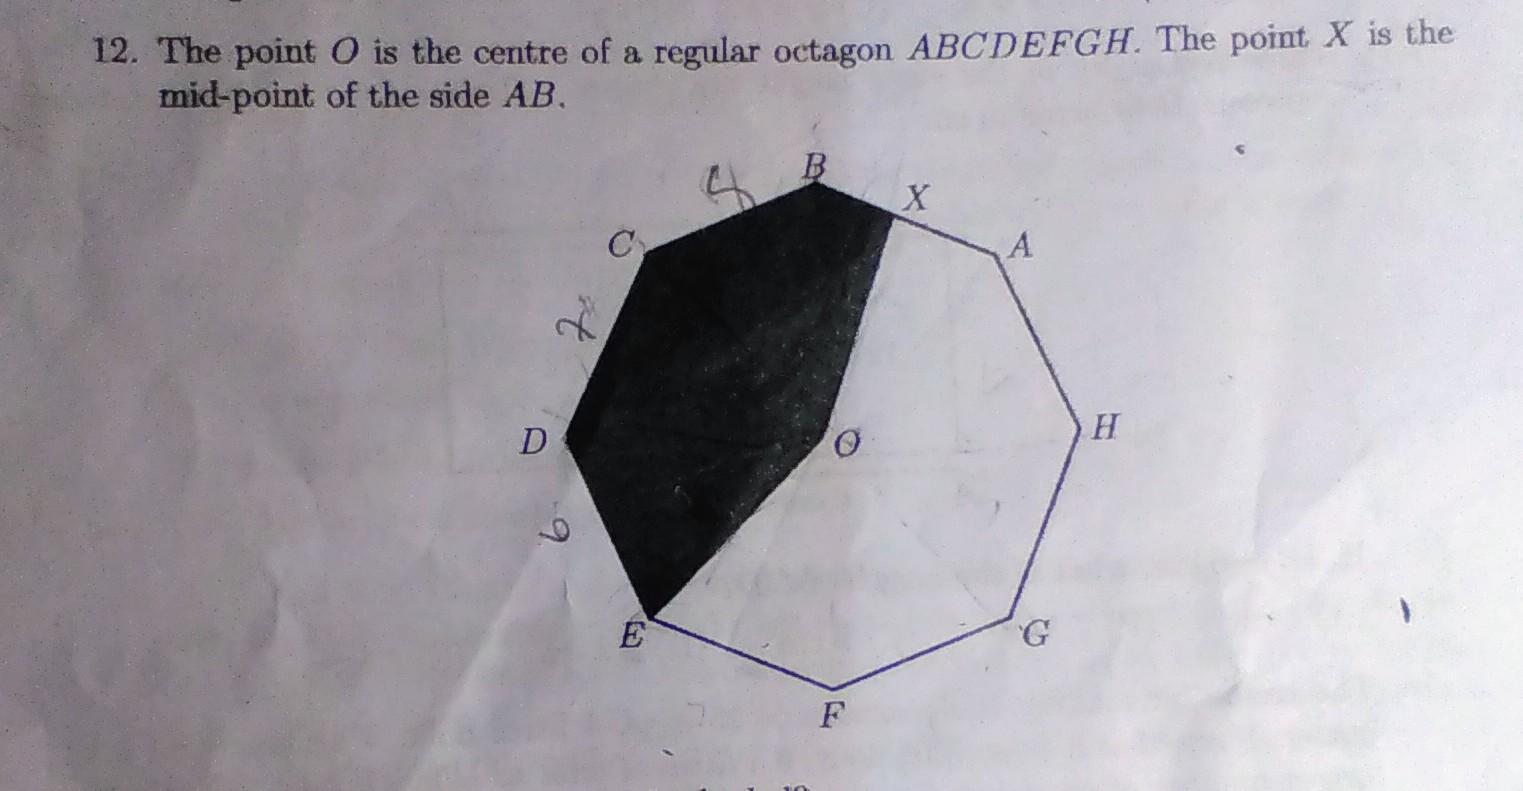 The Point 0 Is The Center Of A Regular Octagon ABCDEFGH. The Point X Is The Mid-point Of The Side AB.